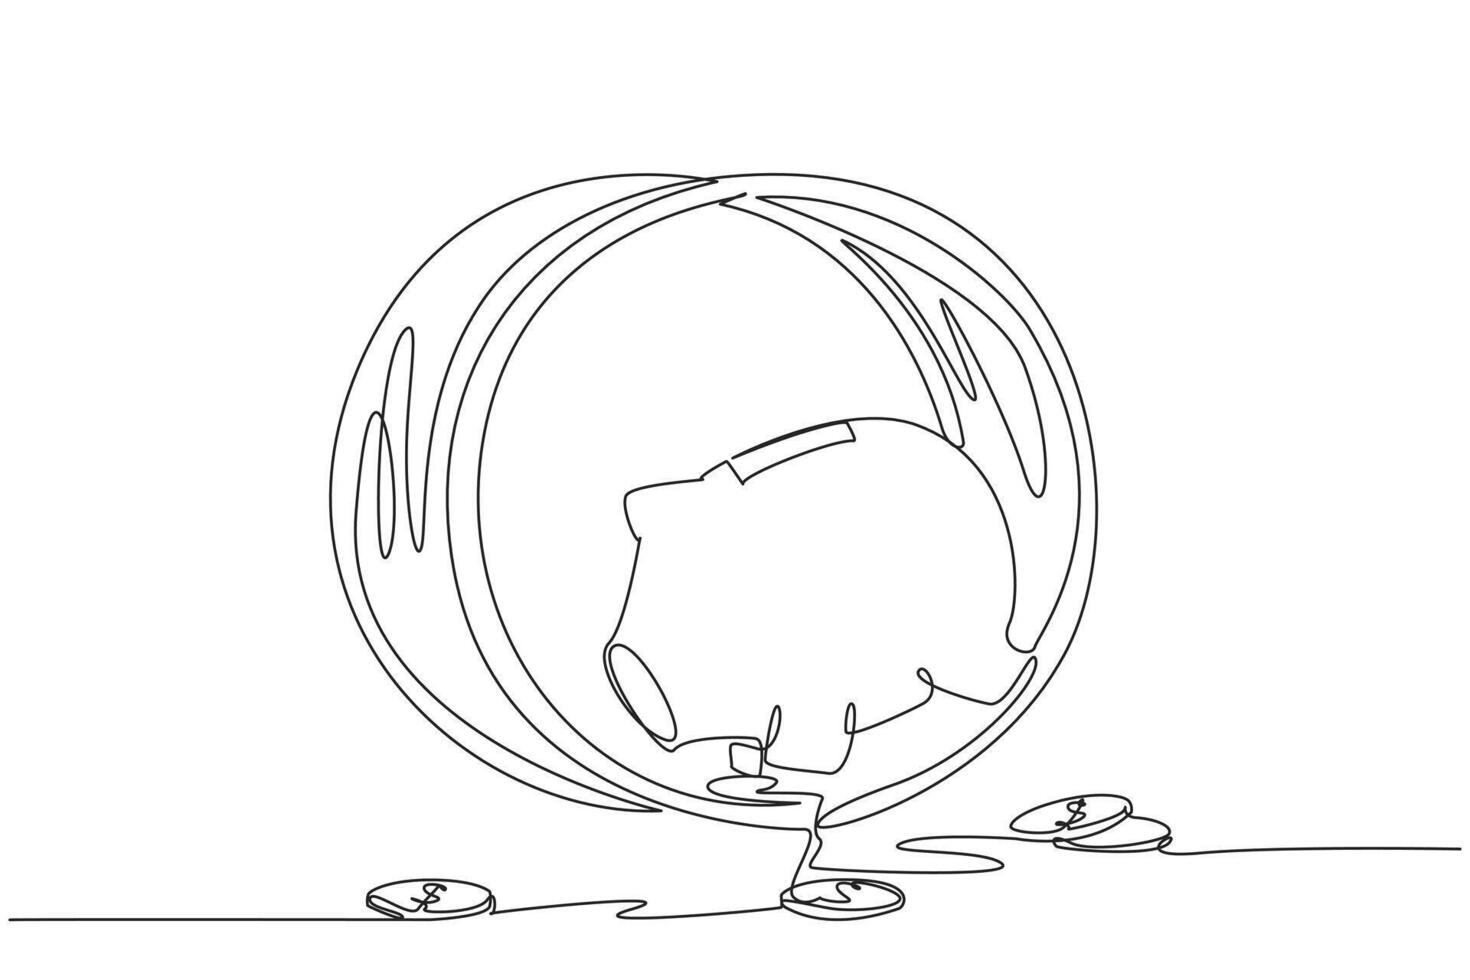 Single continuous line drawing piggy bank runs on the running wheel. The coins are scattered. Repetitive routine. Spending a lot of money. No calculations. Debt. One line design illustration vector